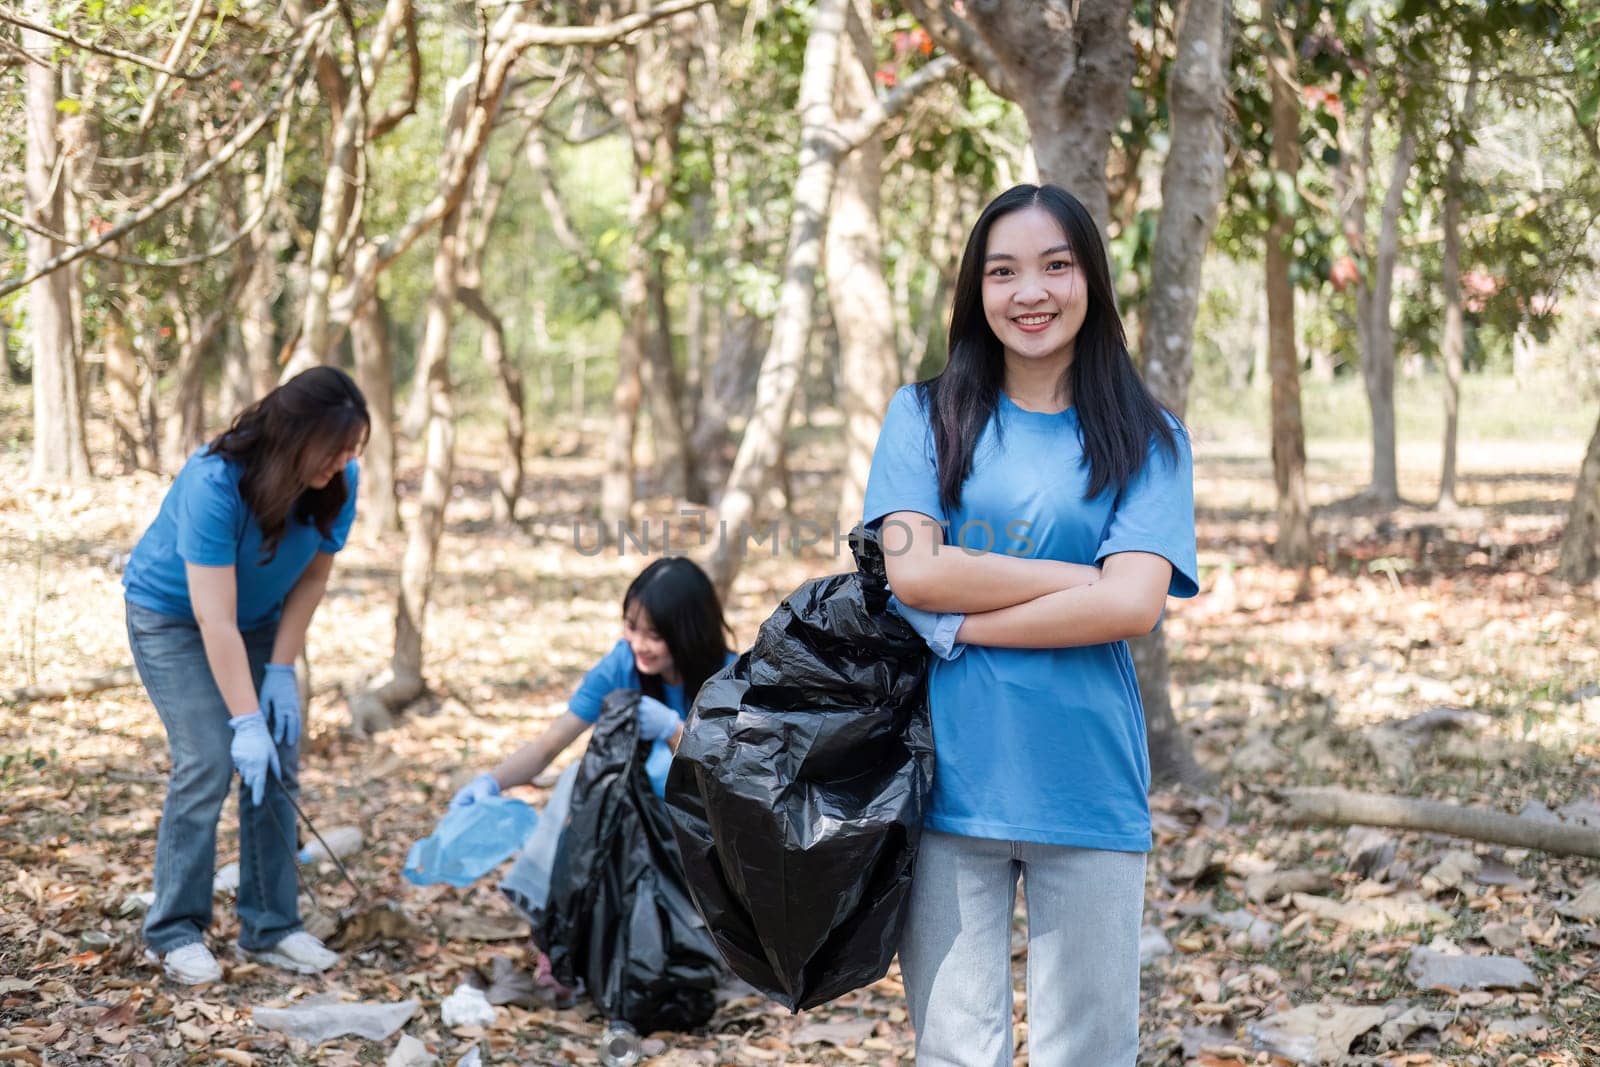 Portrait of a cute young woman holding a garbage bag with a group of Asian volunteers helping to collect garbage in plastic bags, cleaning up the area in the forest to preserve the natural ecosystem..